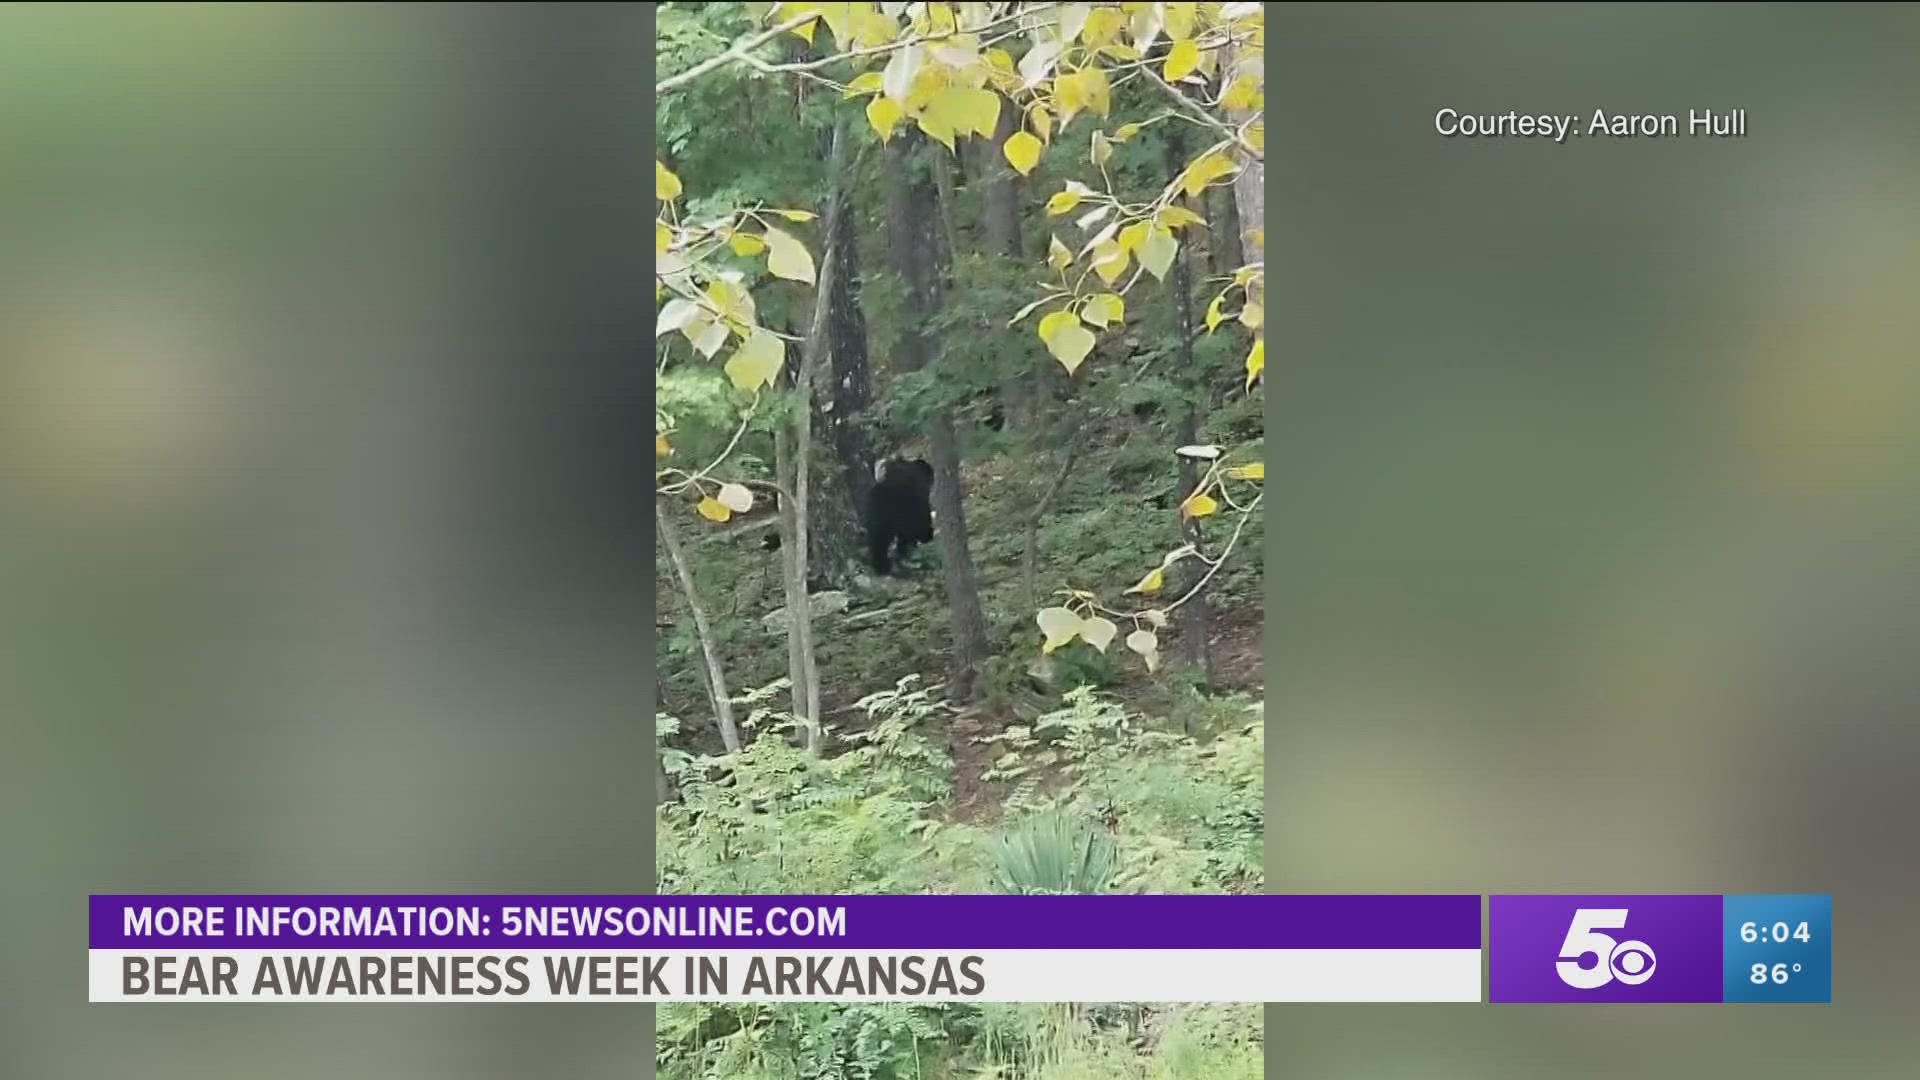 It is currently Bear Awareness Week in Arkansas! State leaders are celebrating the history of the bears and are working to ensure they are around for years to come.